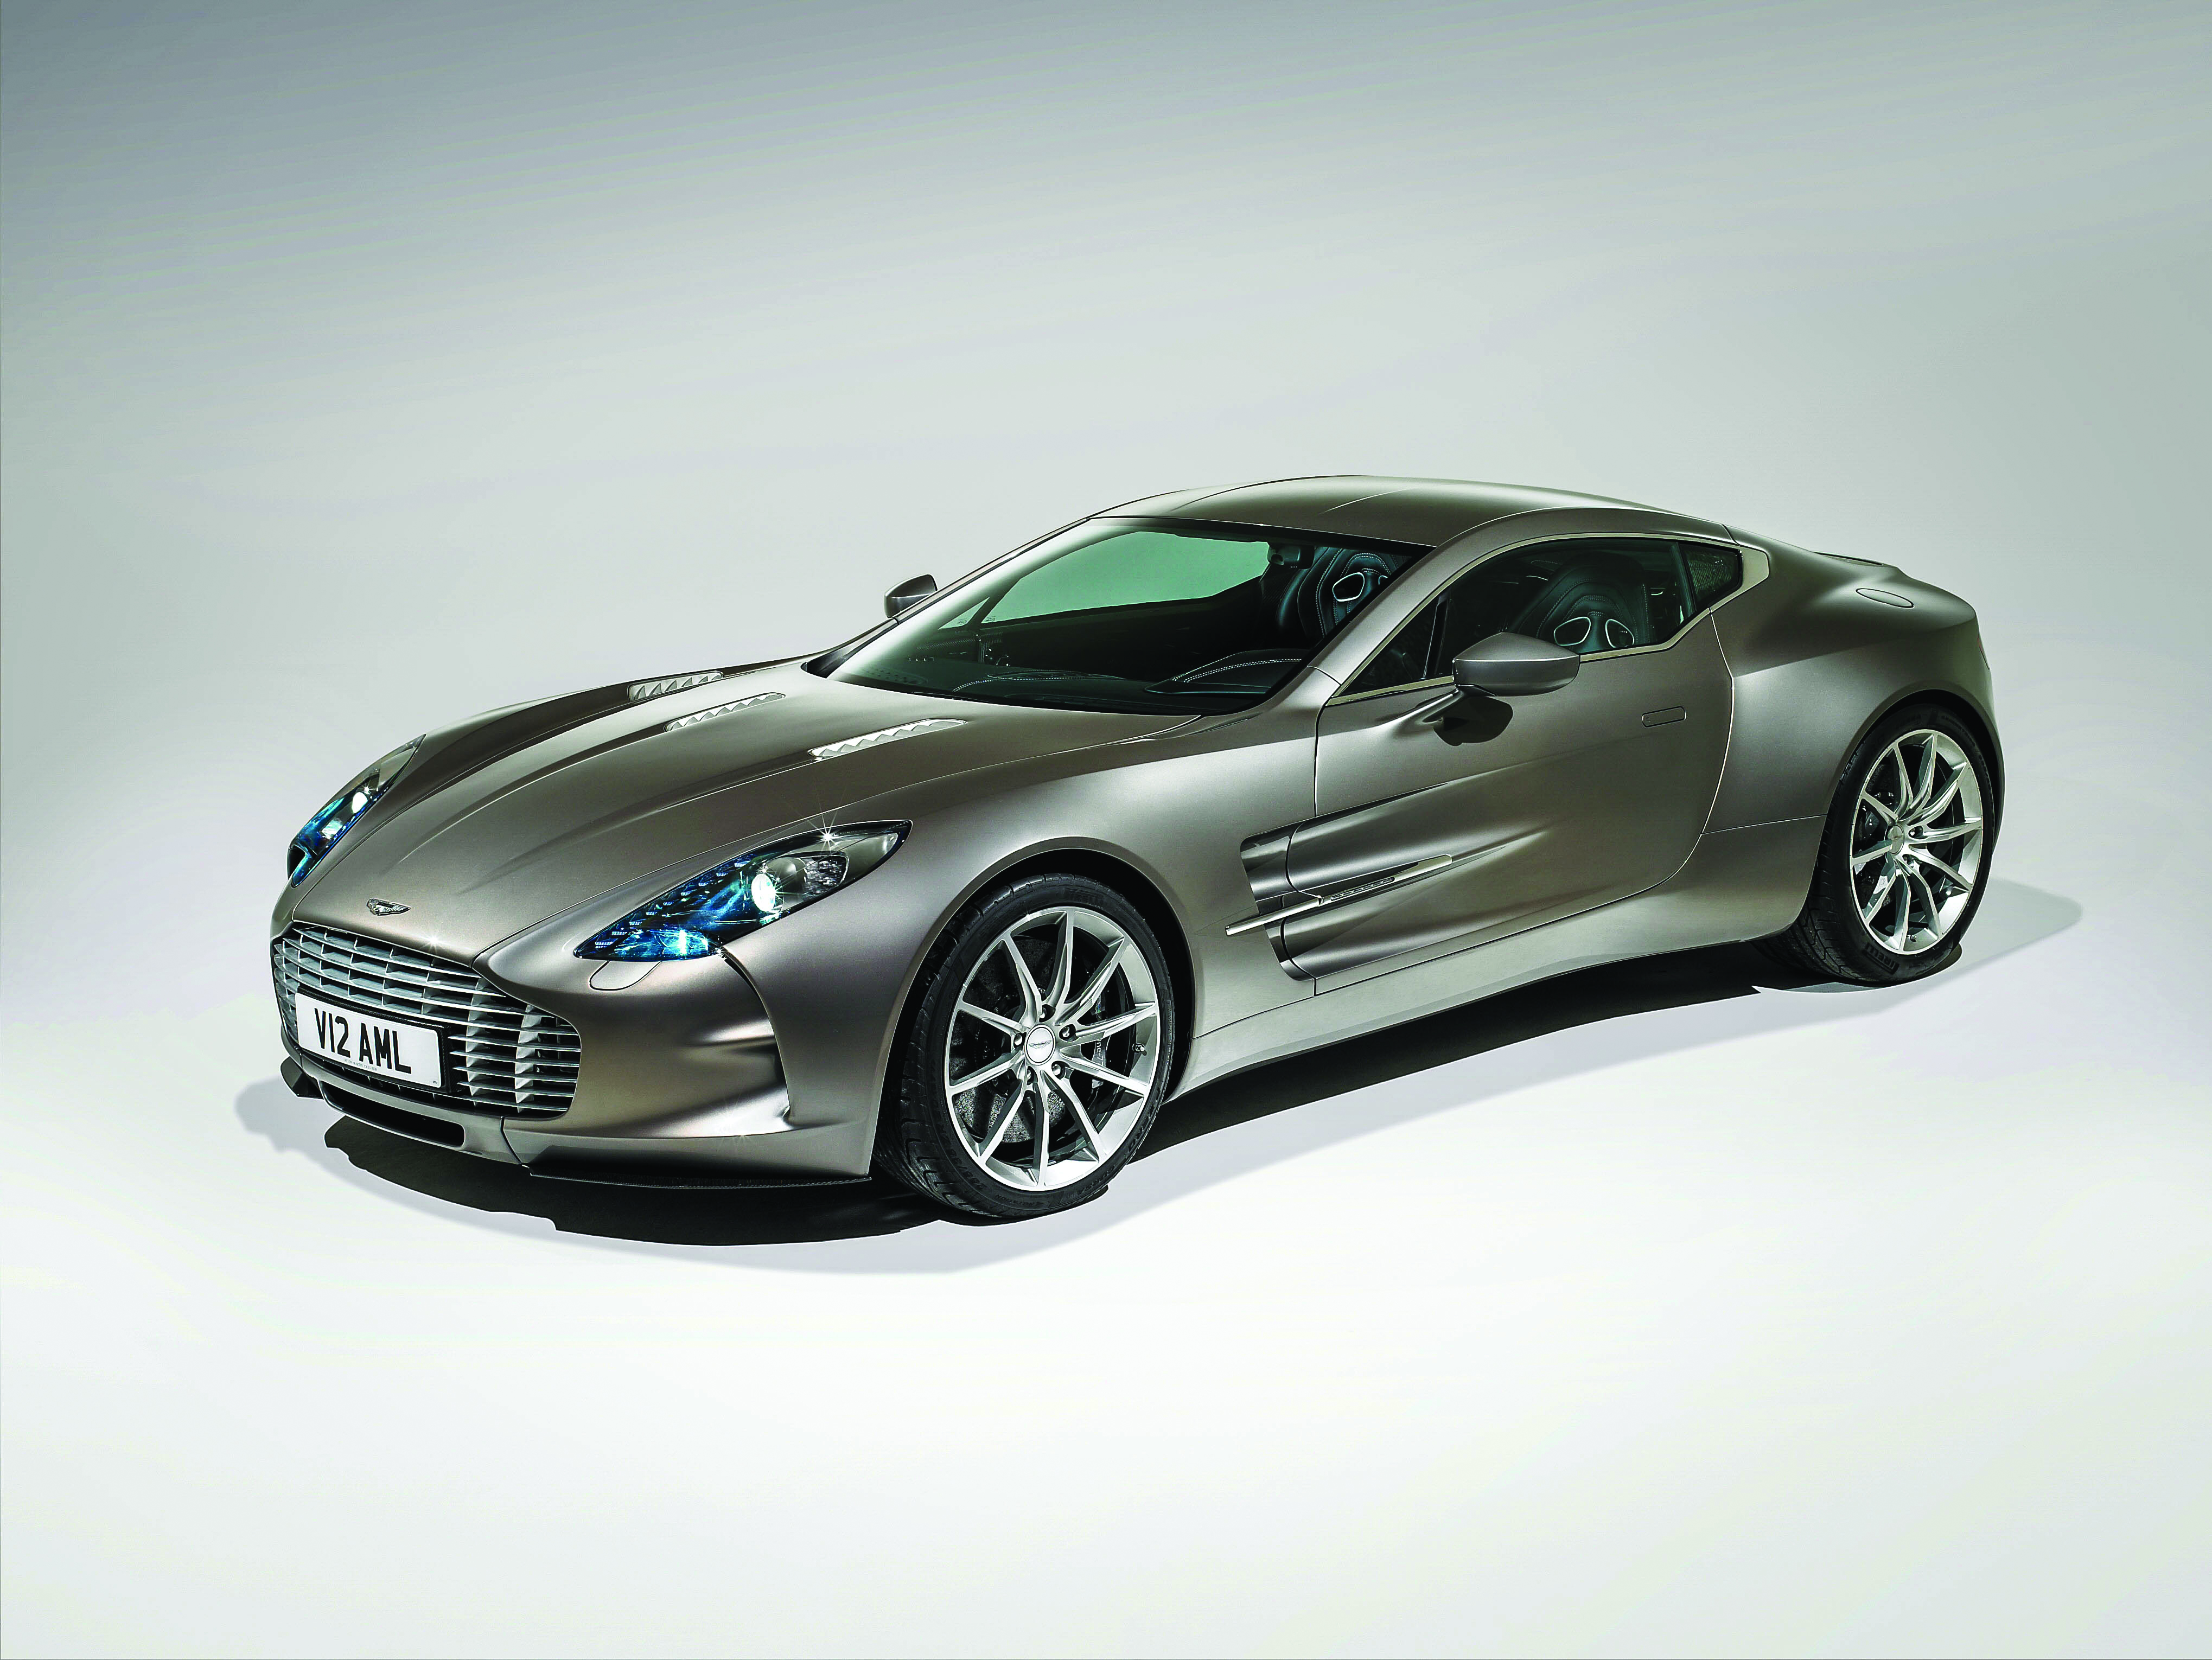 The One-77 is a high-end, low-volume car from Aston Martin